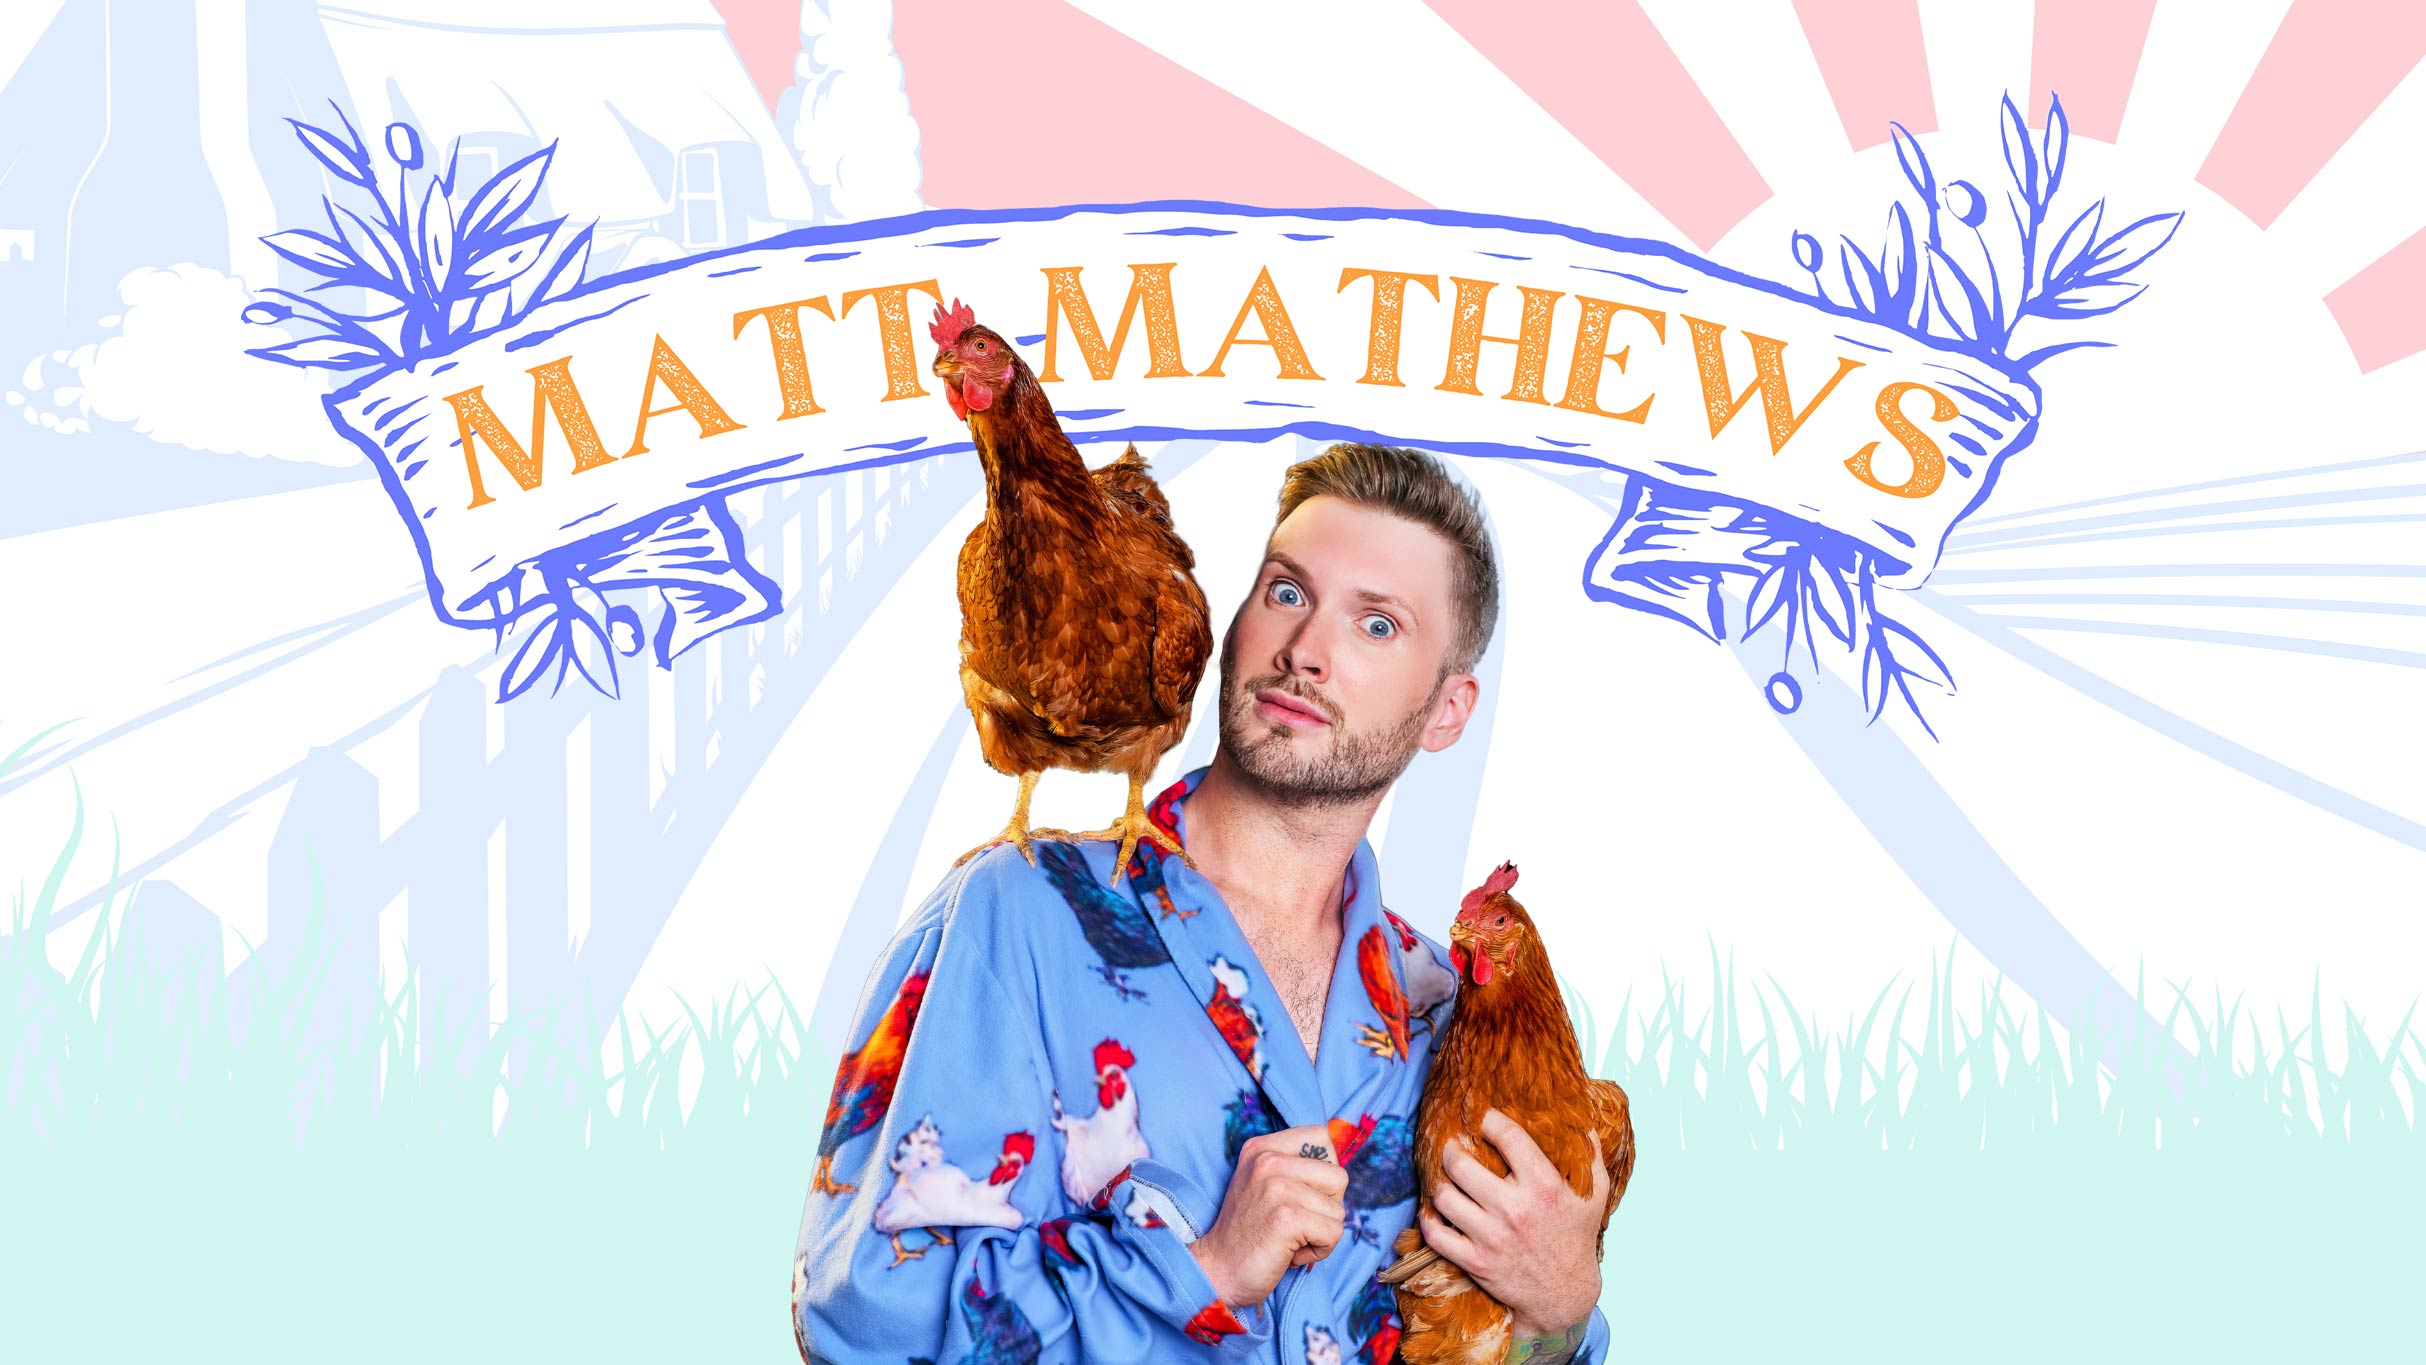 Matt Mathews pre-sale code for performance tickets in Chesterfield, MO (The Factory)